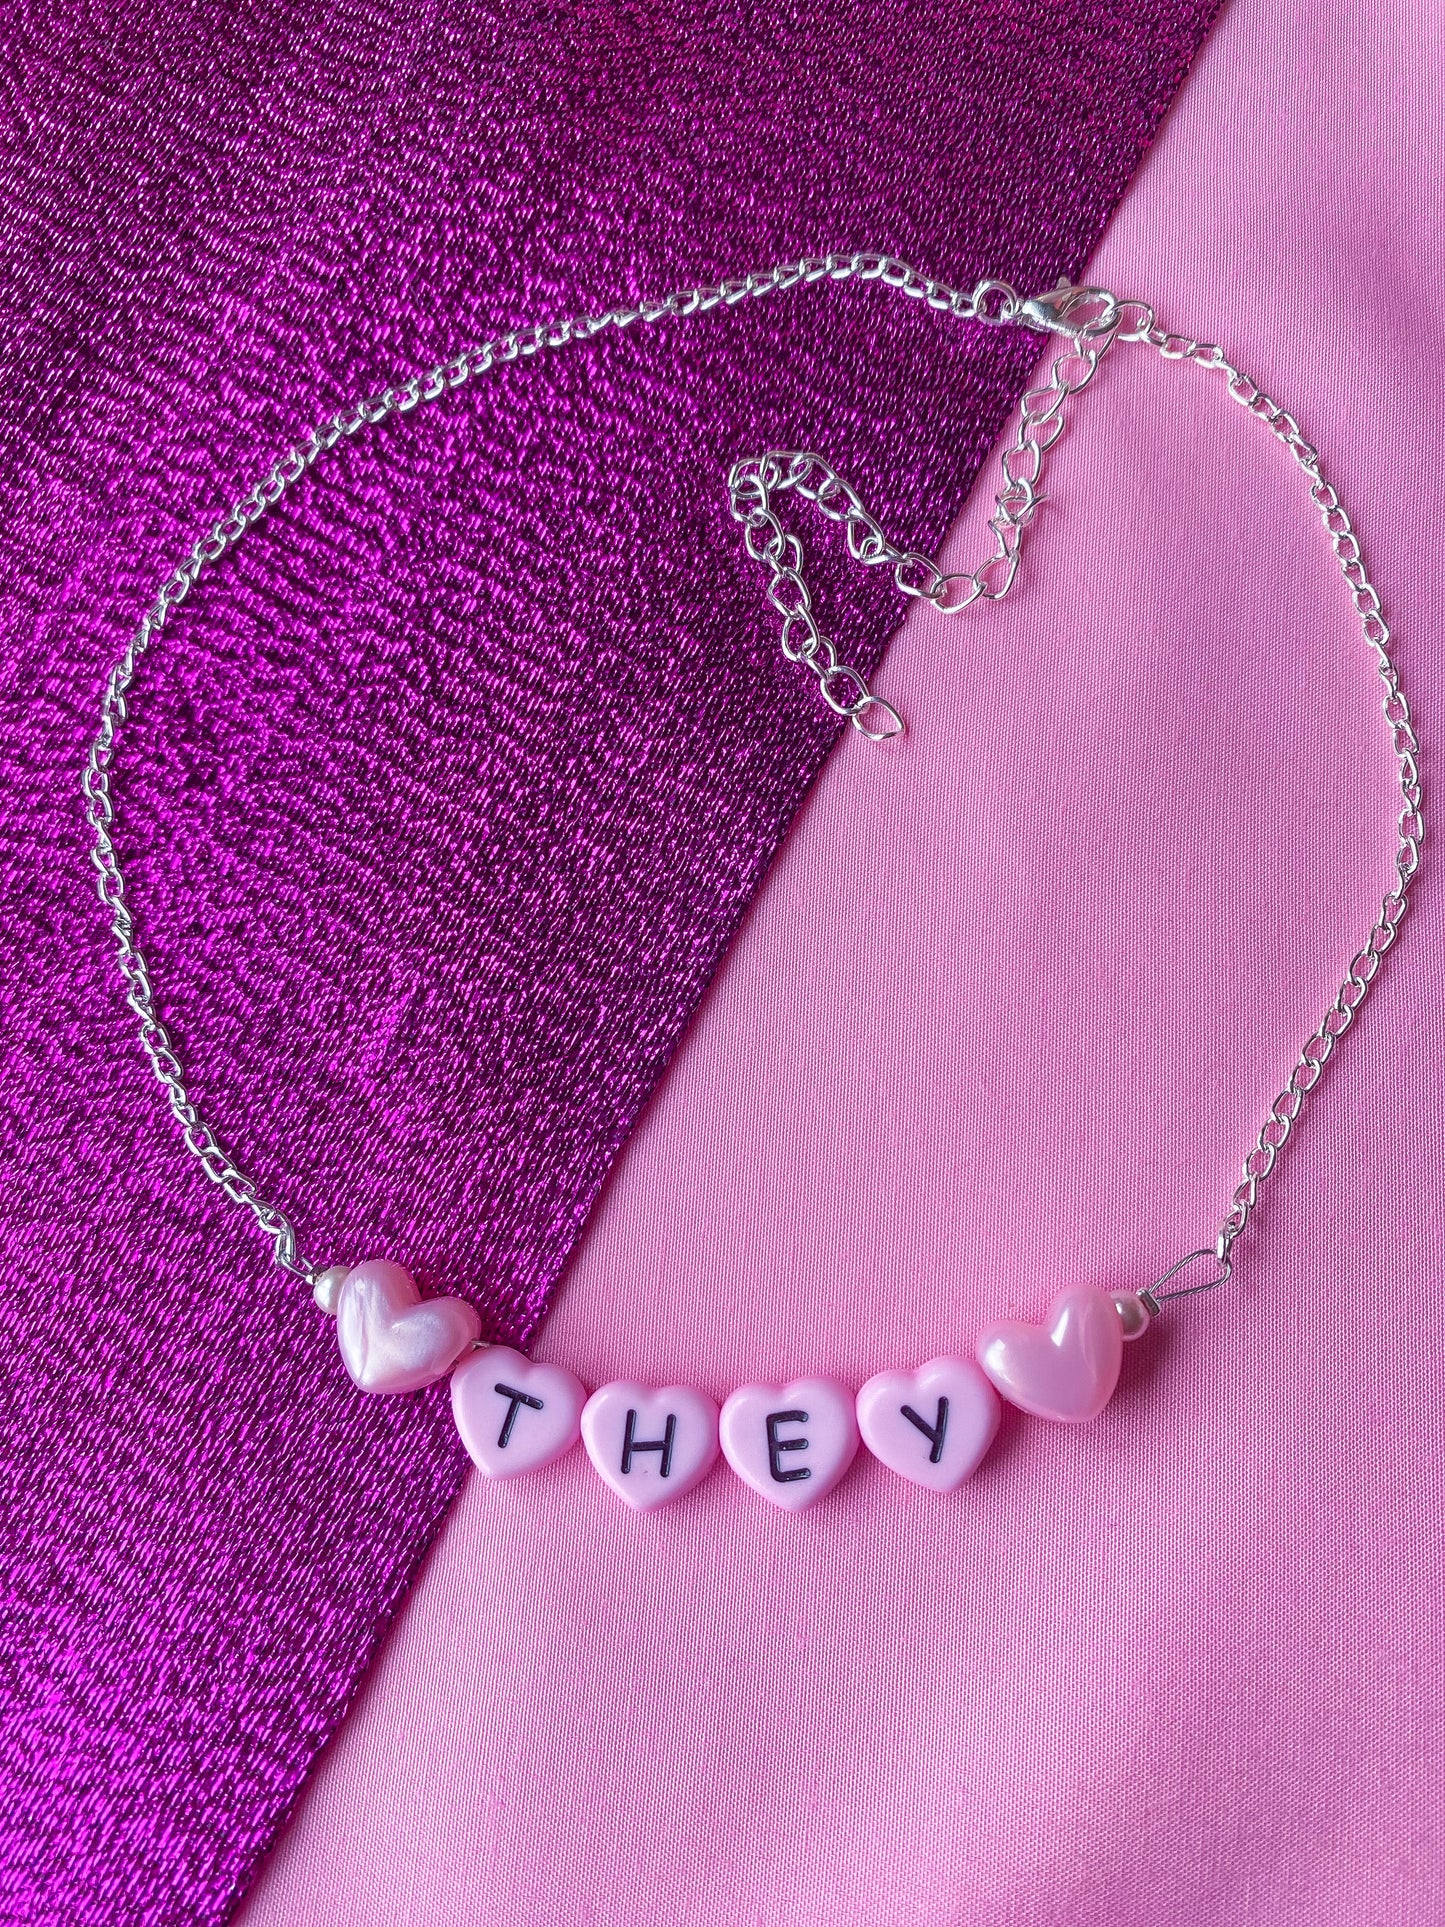 Pink They love heart pronoun letter bead necklace